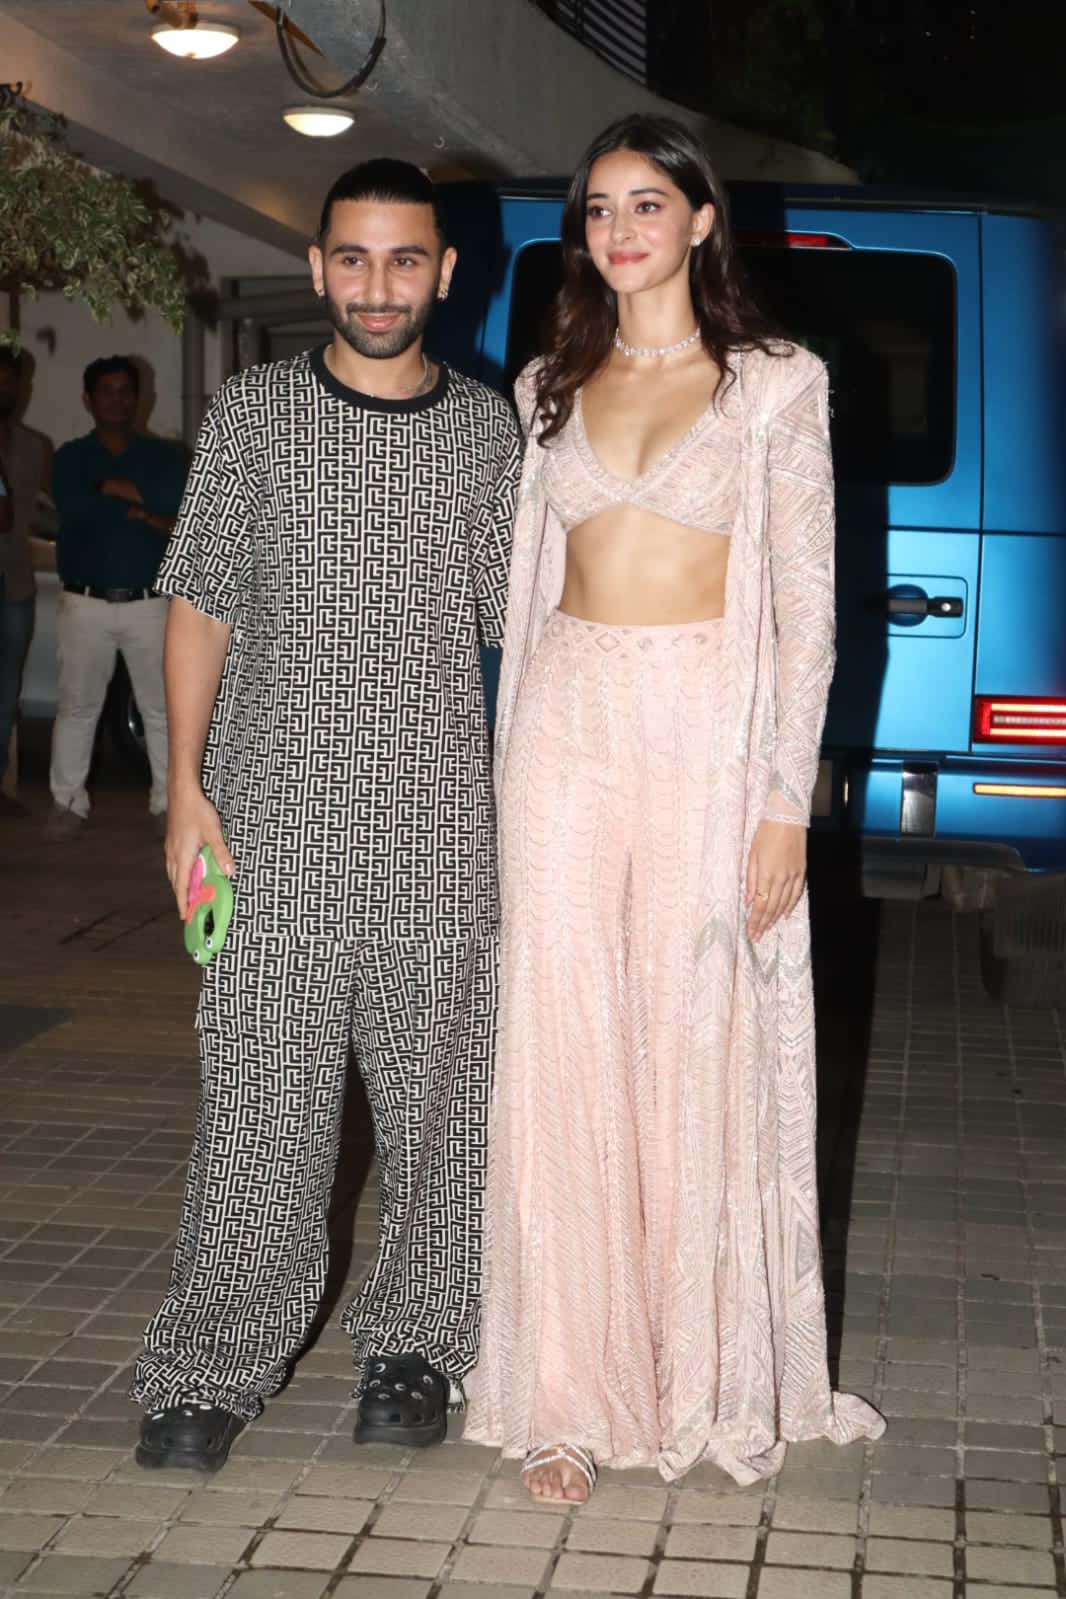 Orry arrived with his bestie Ananya Panday